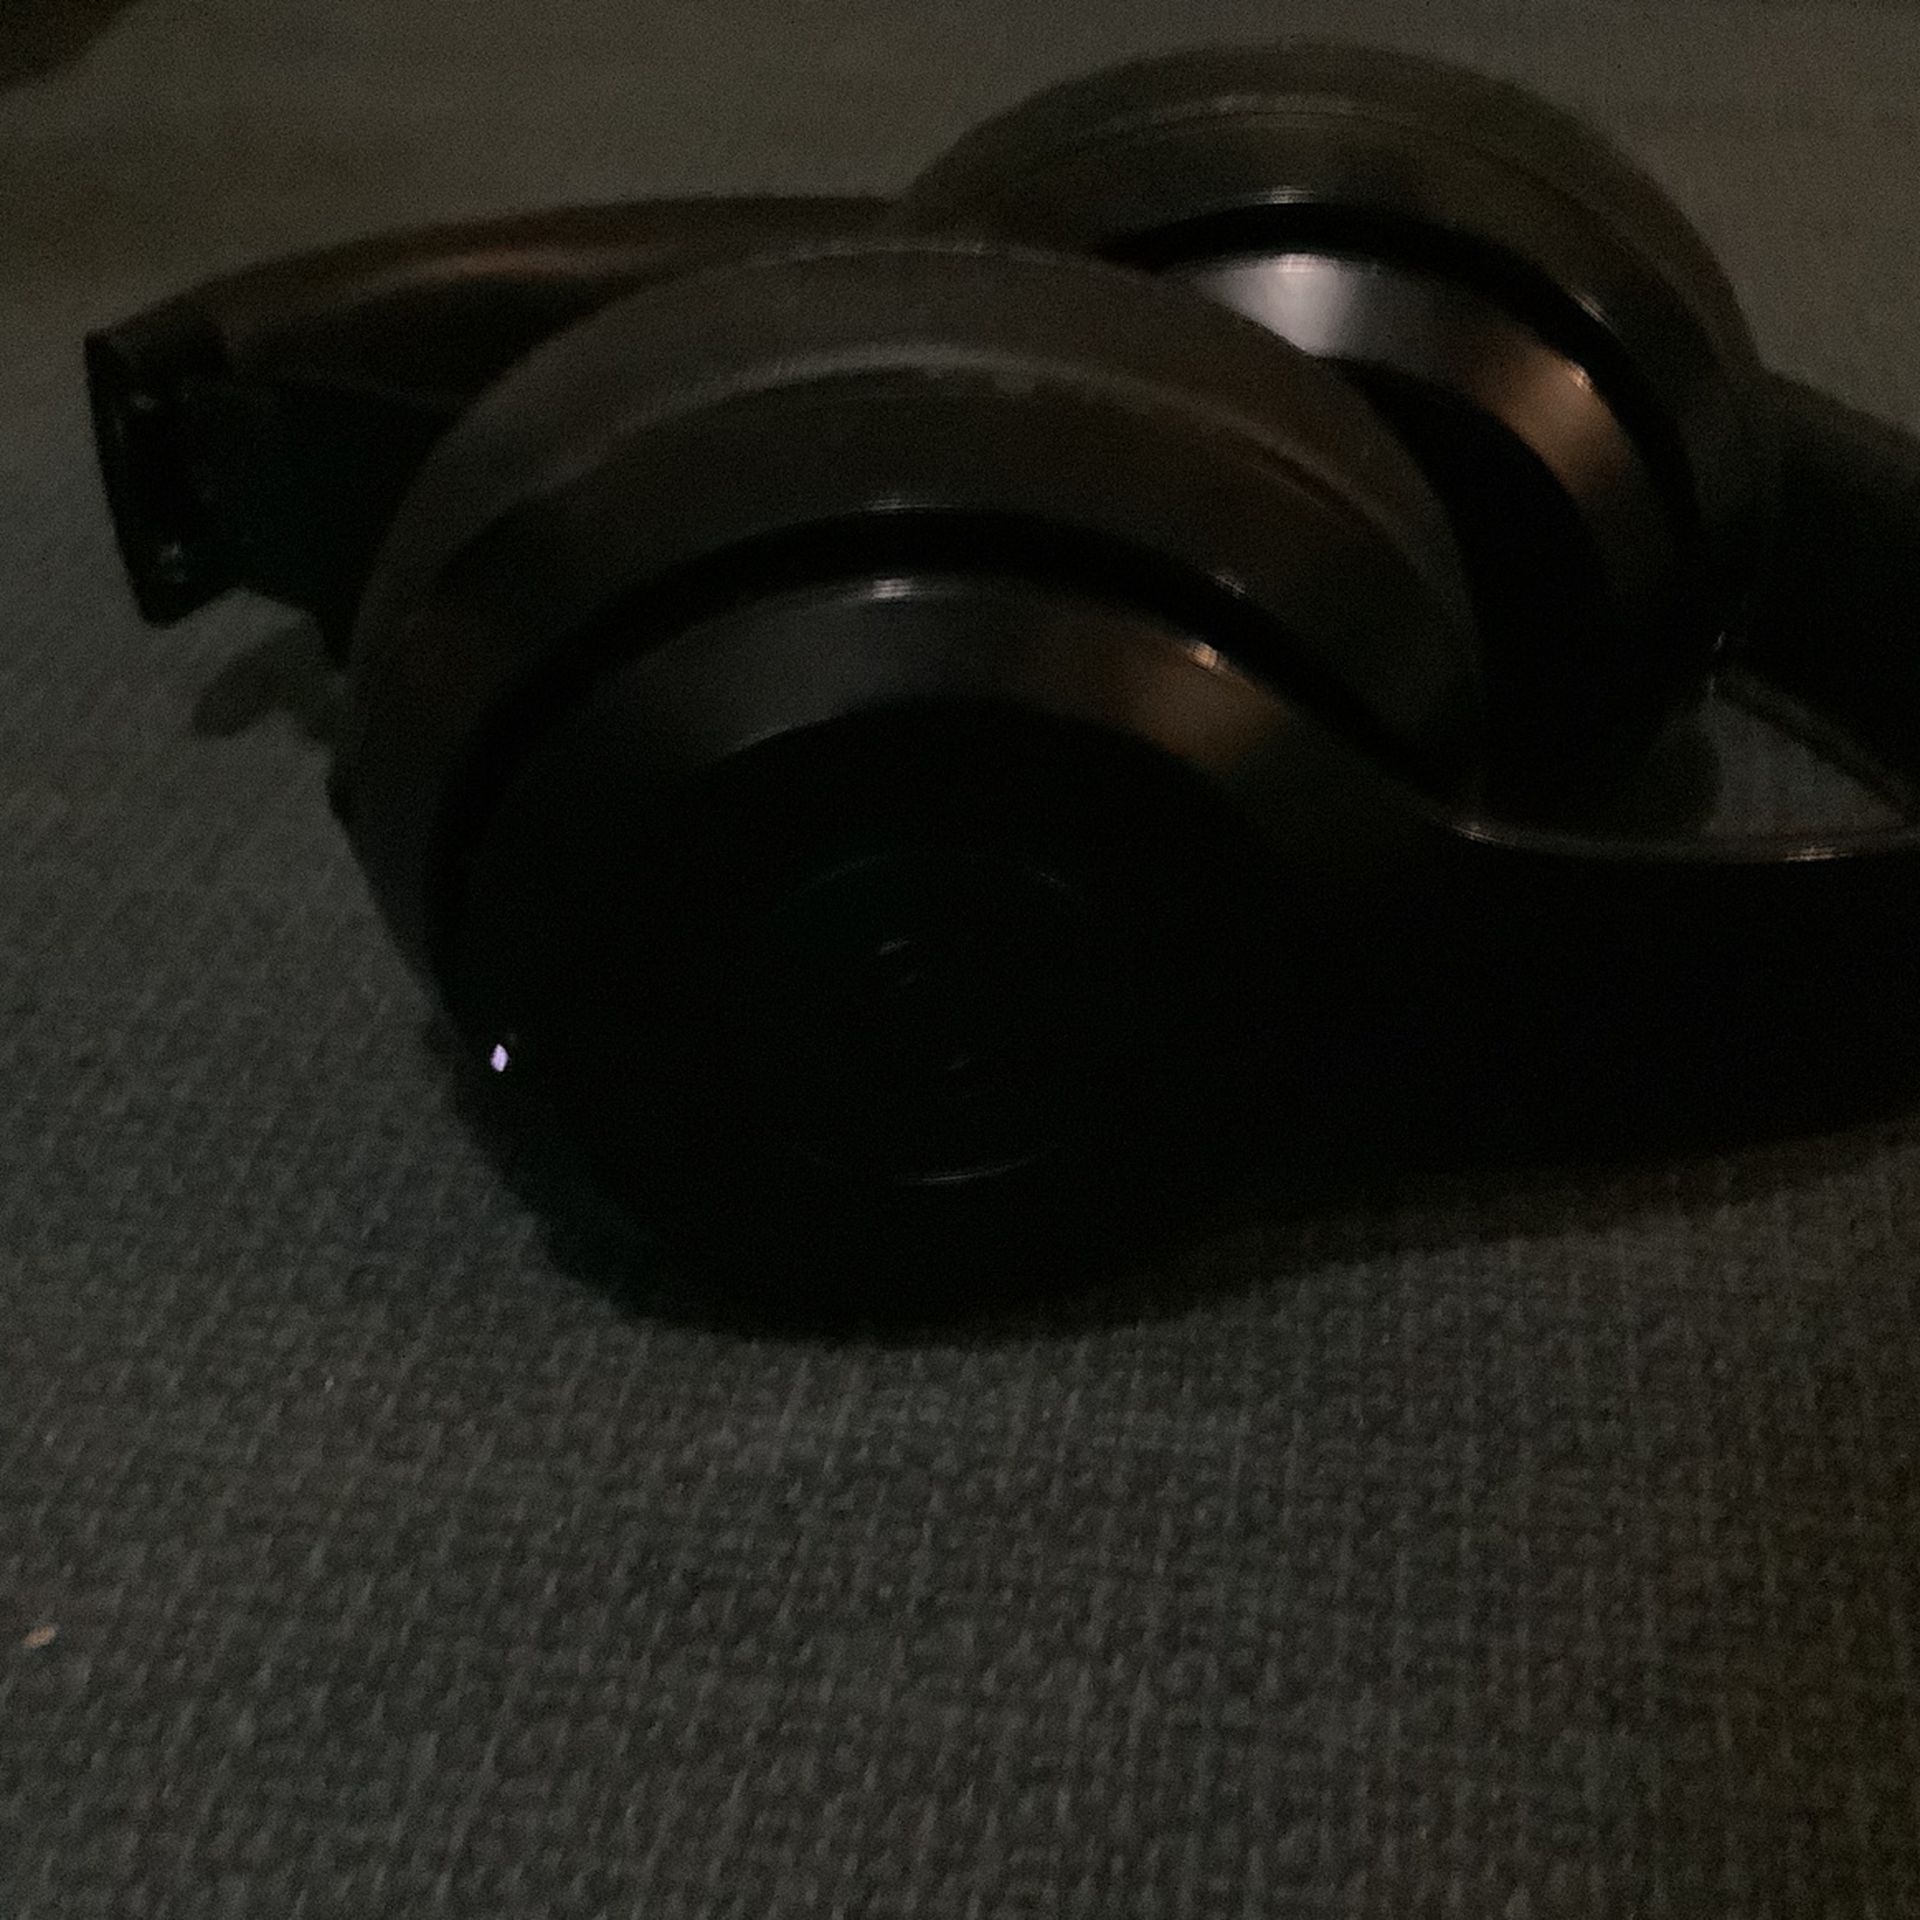 One Day Sale $90 Brand New Still In Wrap Beats Solo 3 Headphones Black Like New